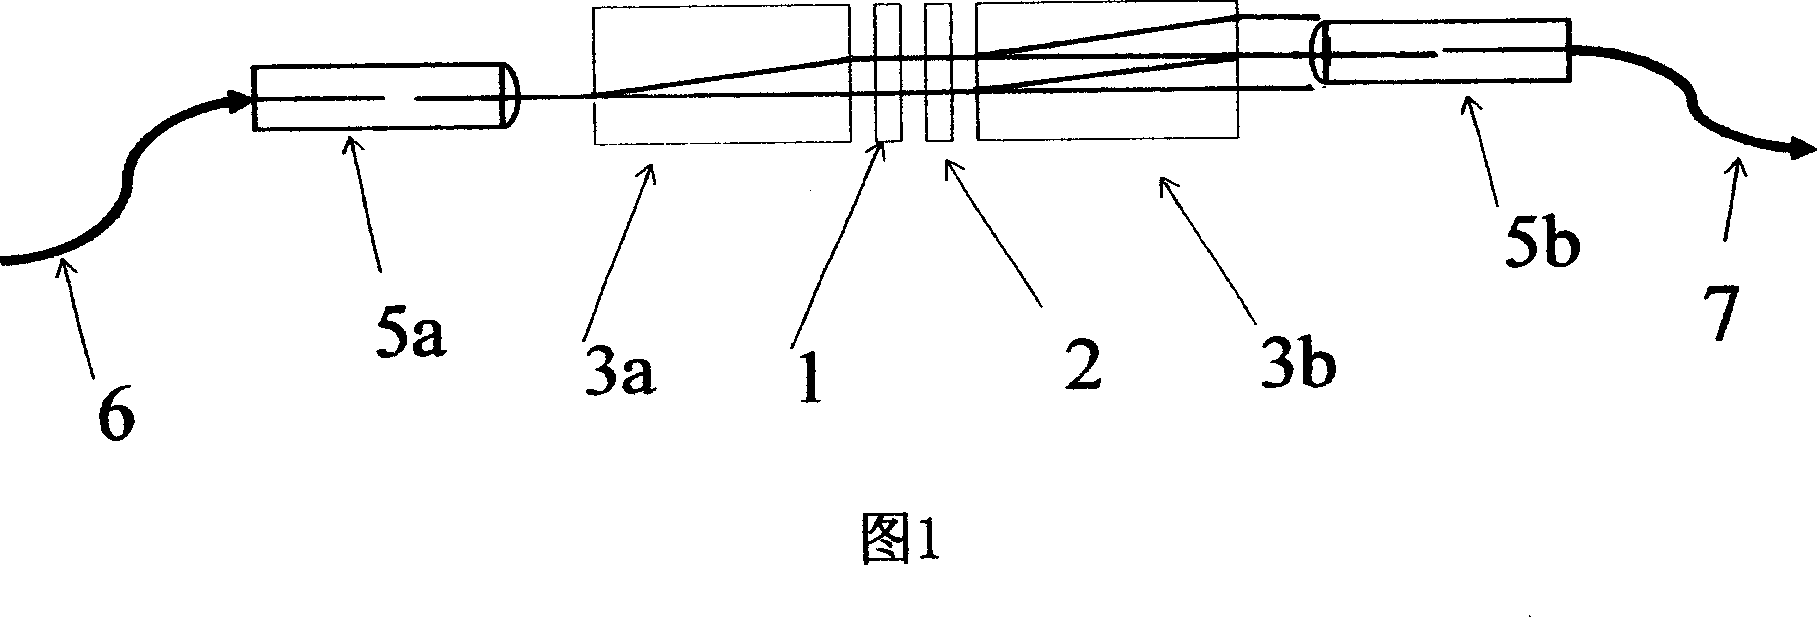 Fiber magnetic optical probe device and its usage system